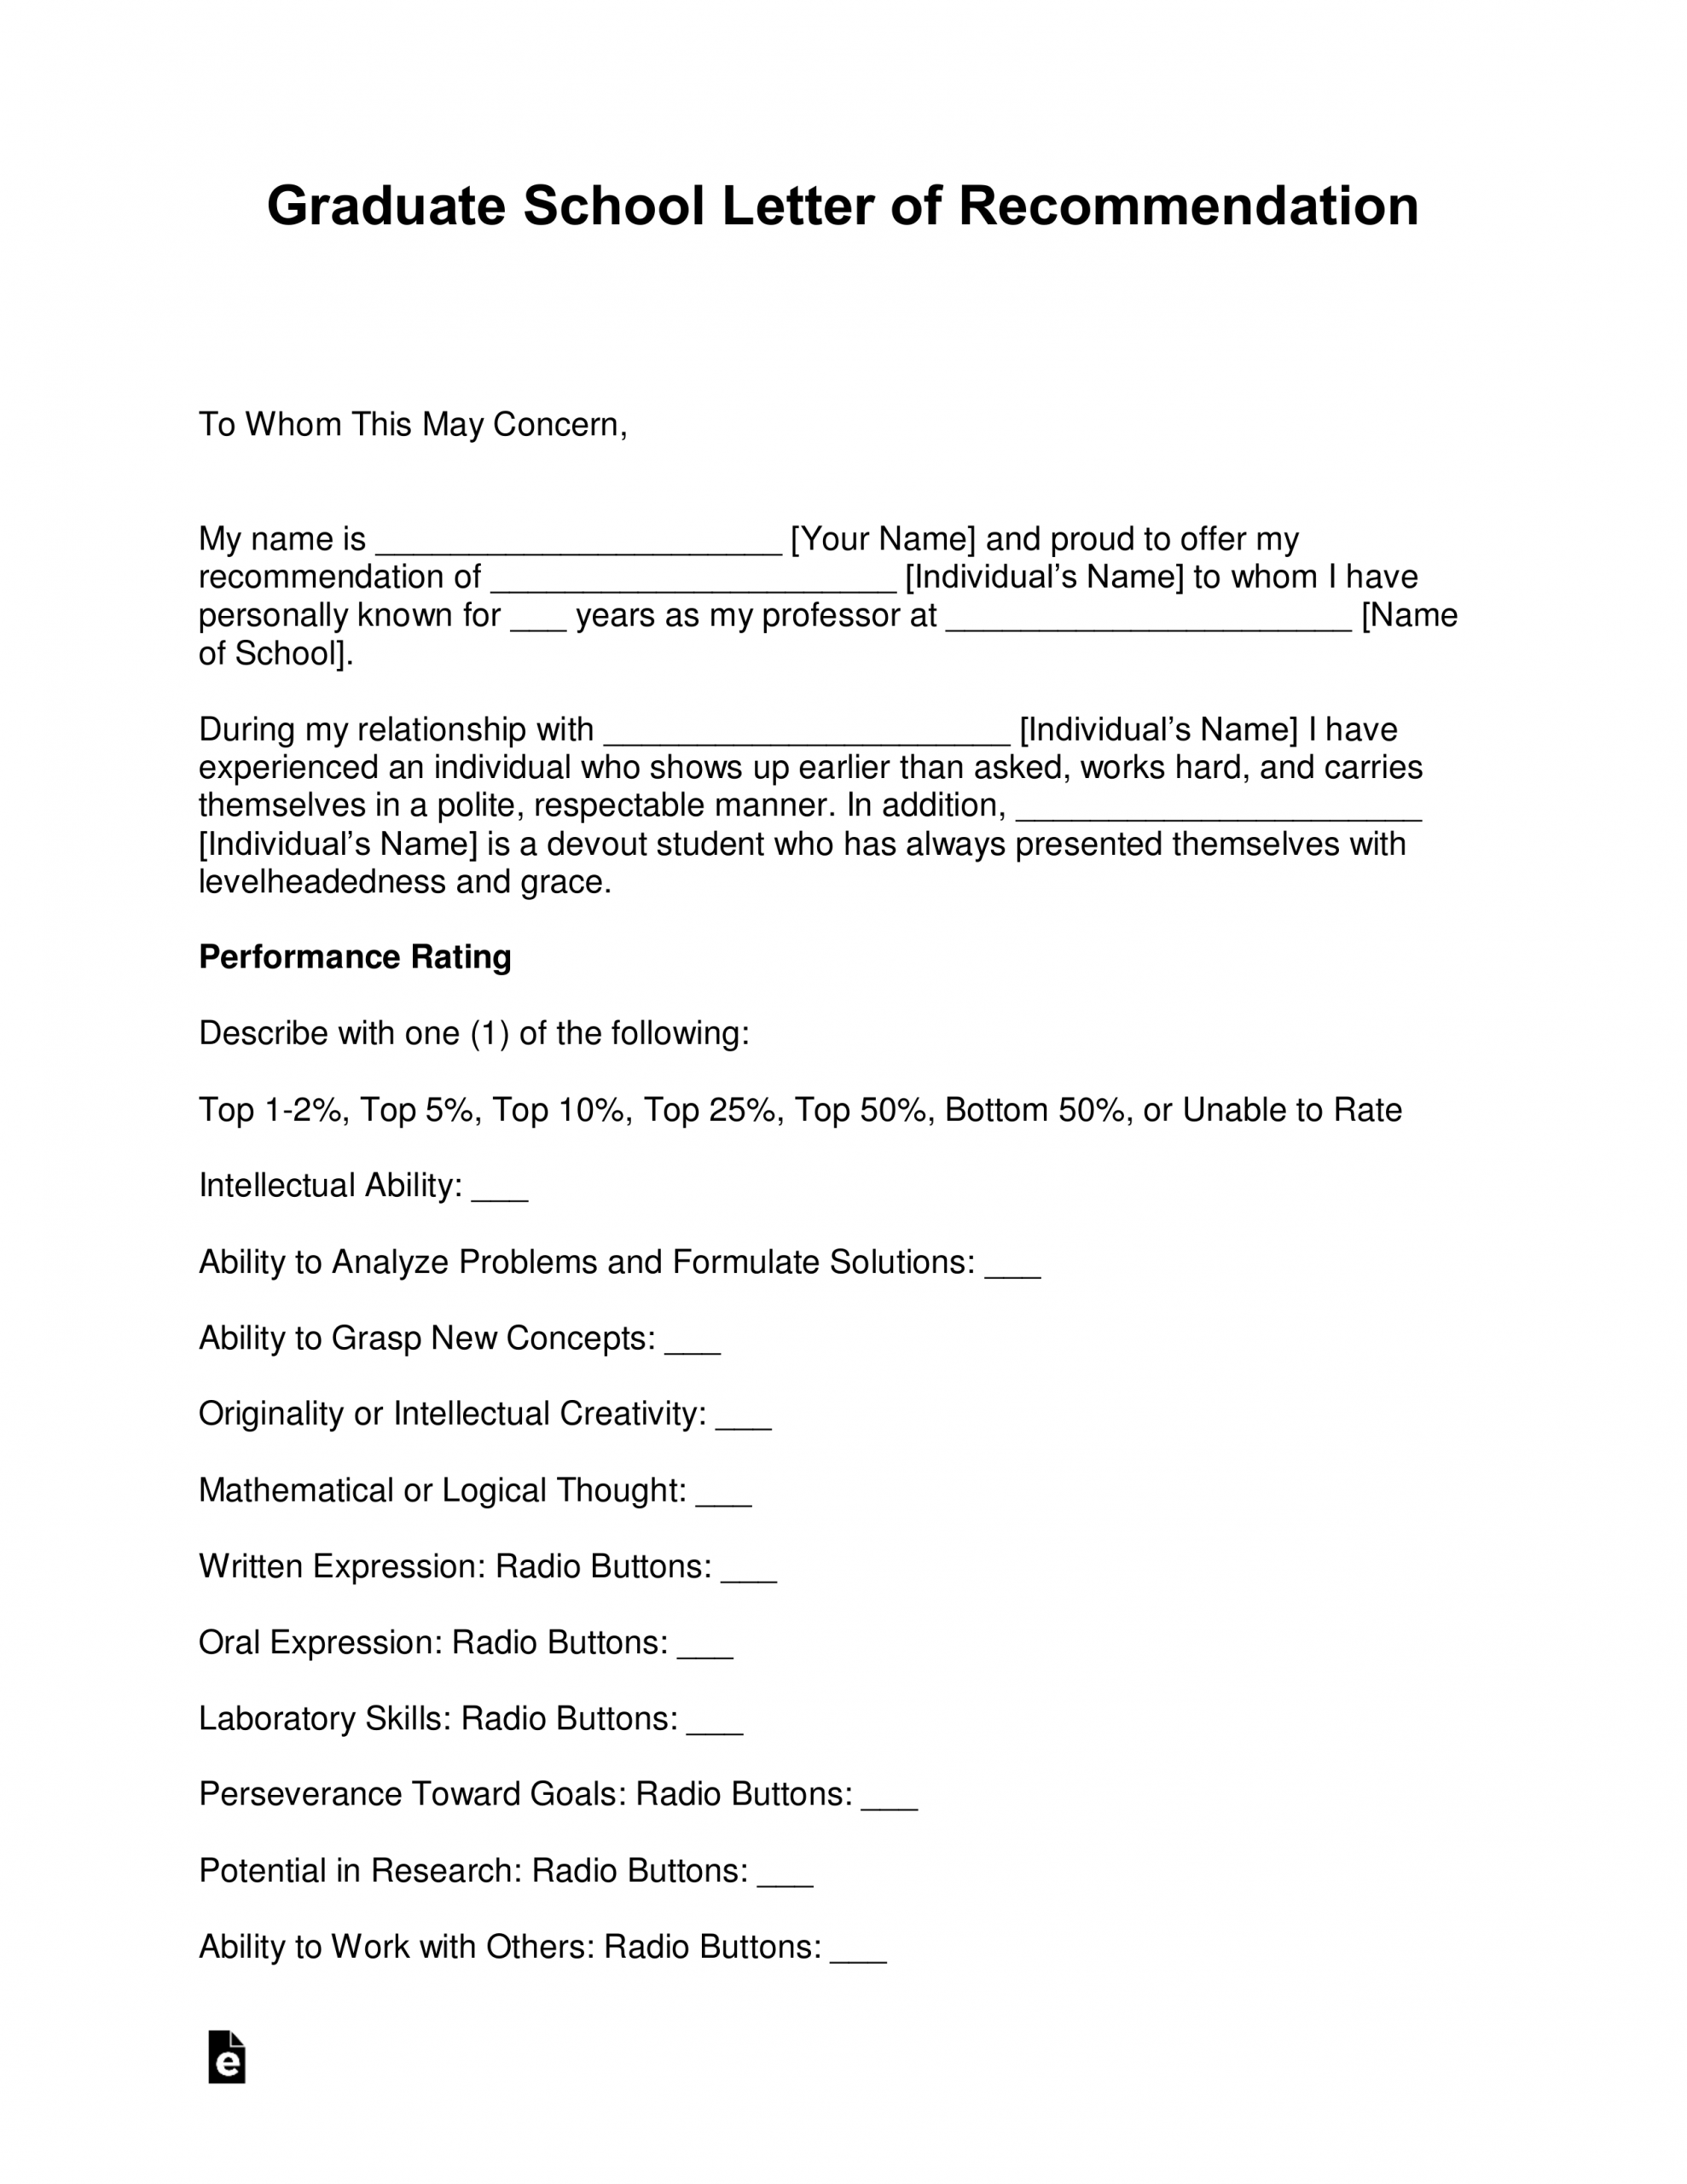 Free Graduate School Letter Of Recommendation Template in sizing 2550 X 3301